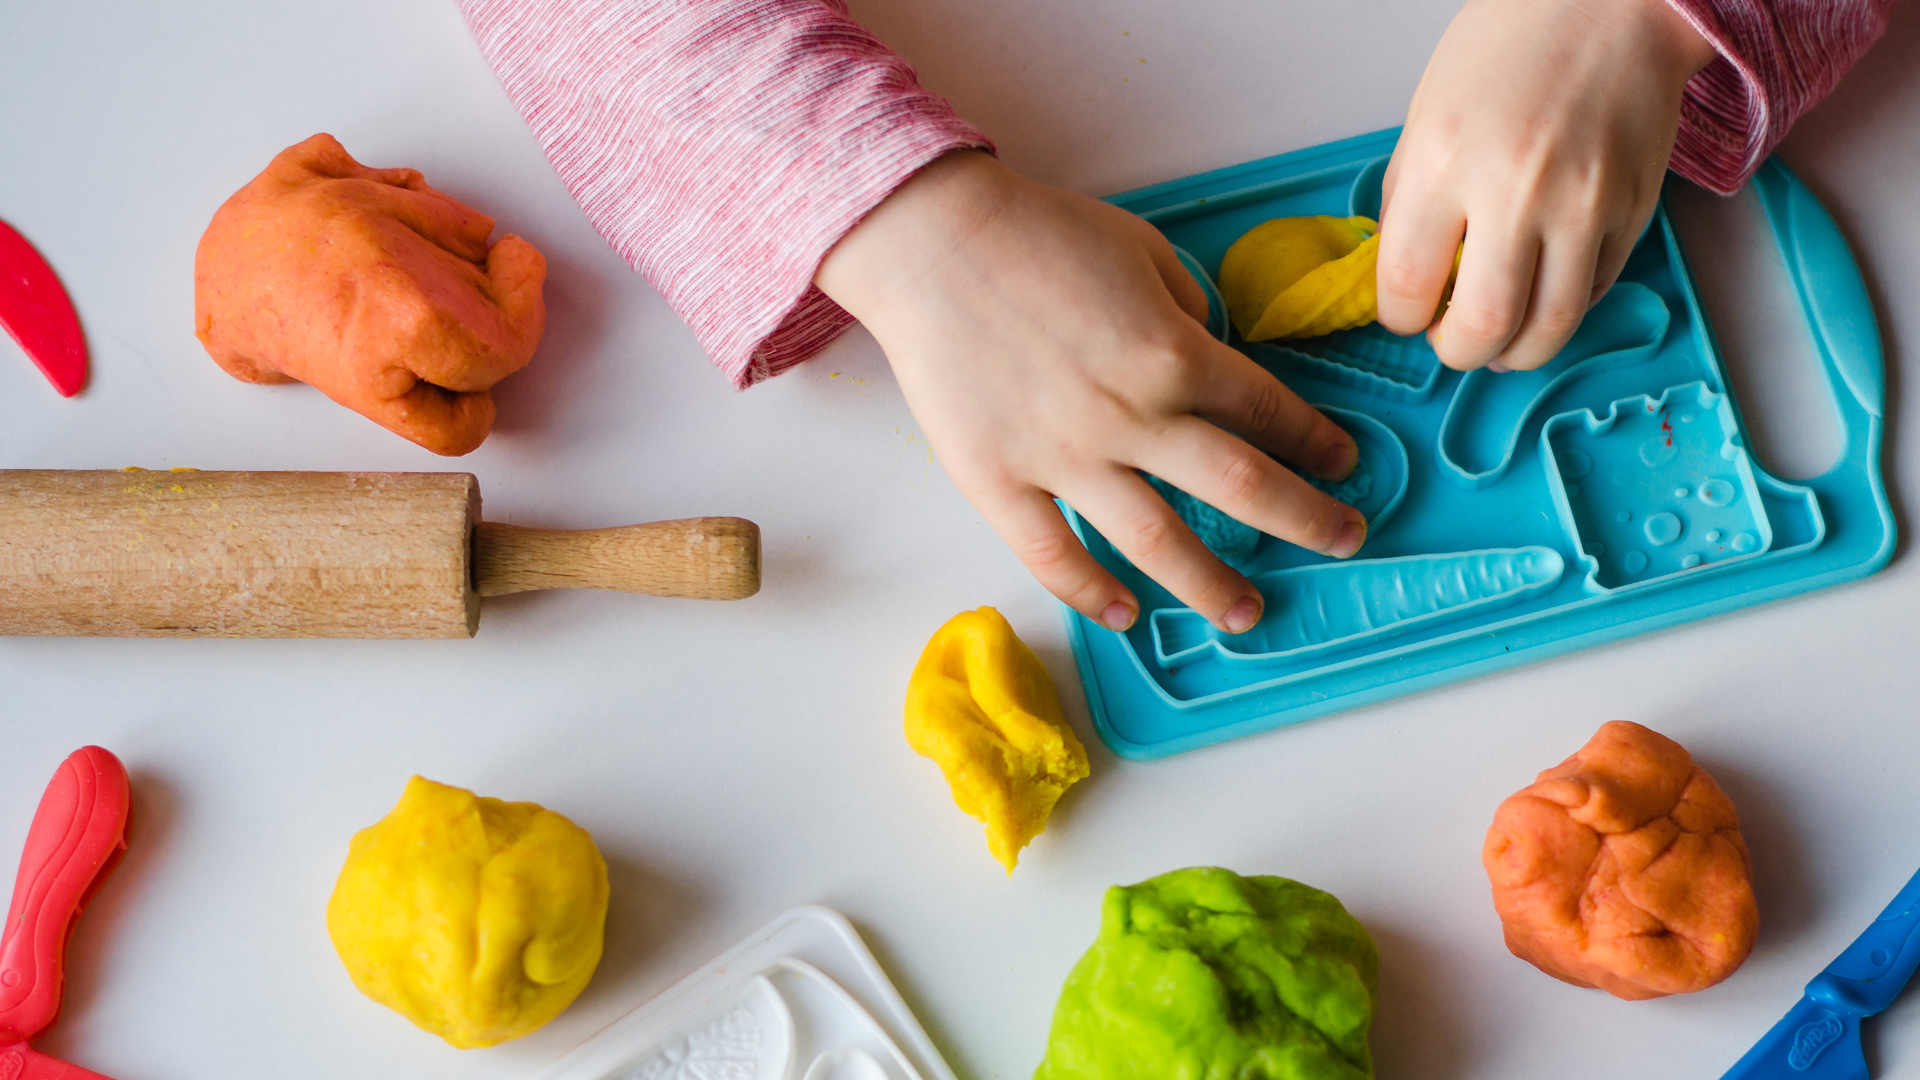 Does your child have coeliac disease or a wheat allergy? Make your own gluten-free playdough